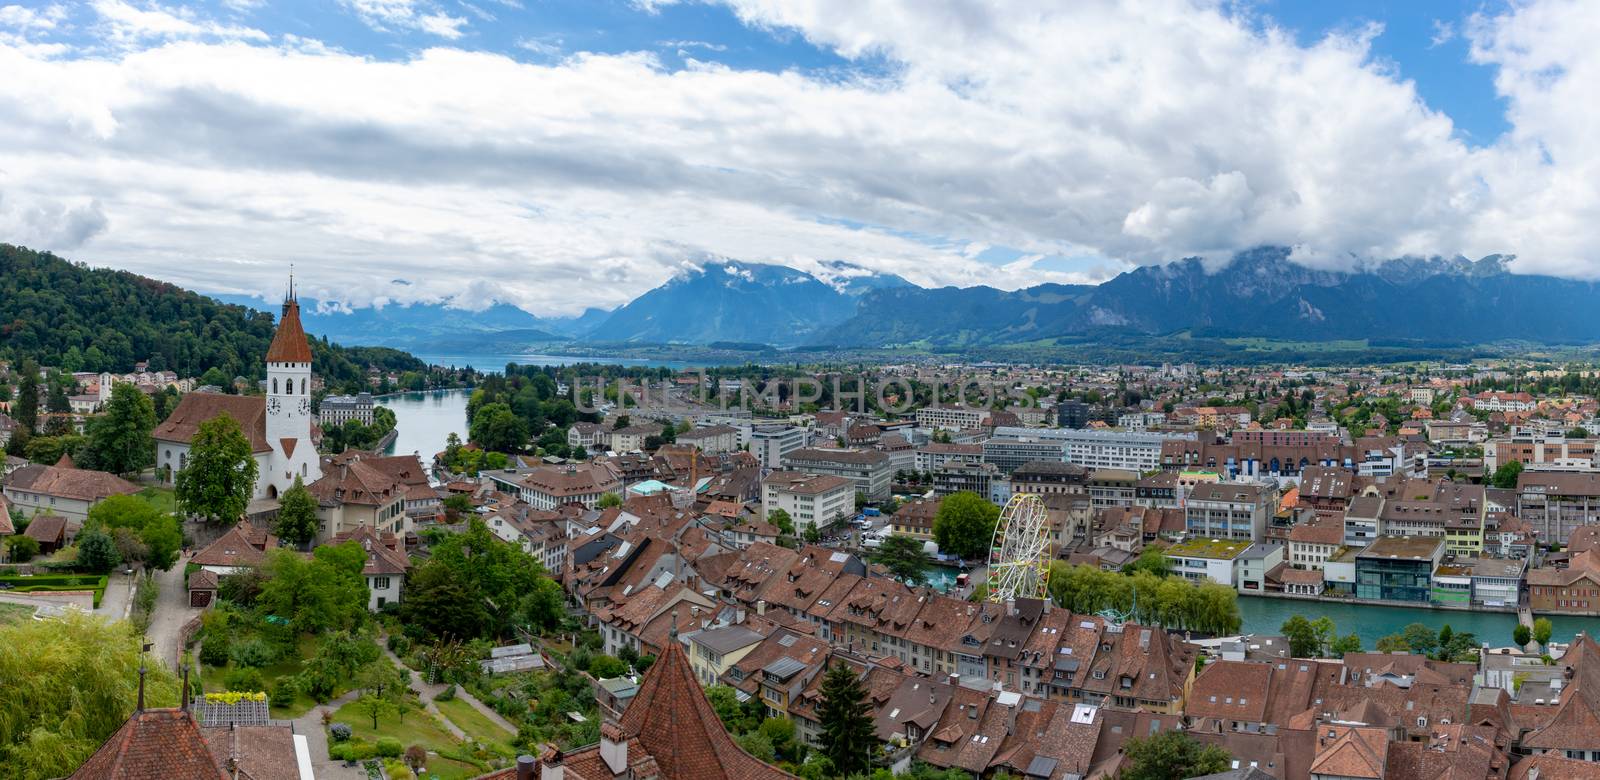 Panorama of Thun, Switzerland viewing Castles, Lakes, and the town, moutains and Interlaken.